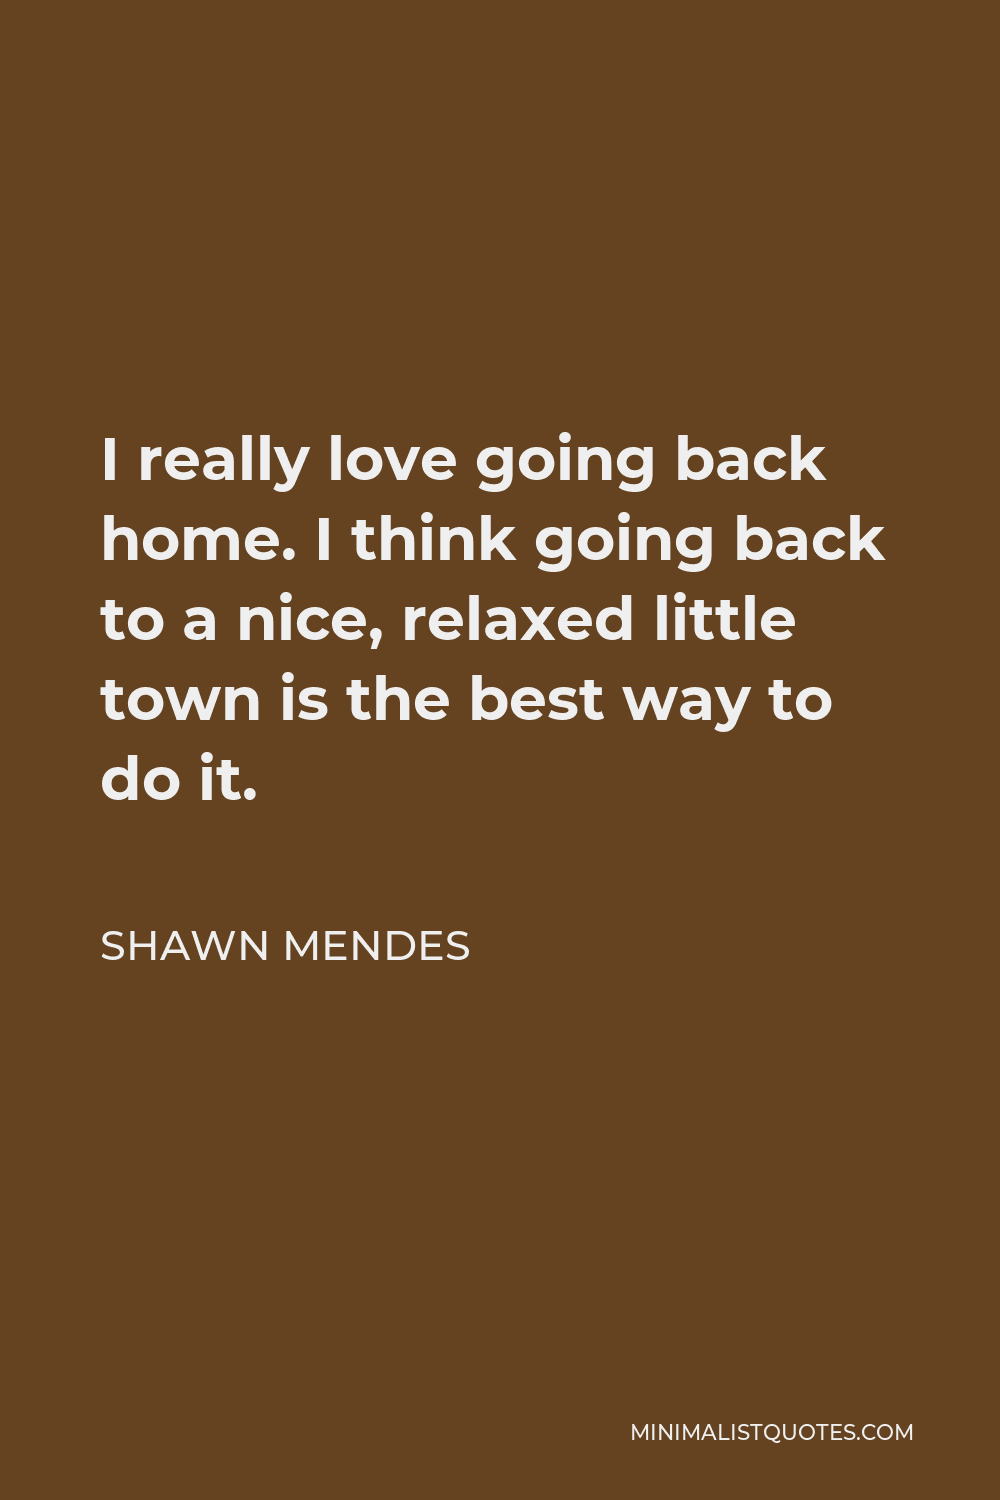 Shawn Mendes Quote - I really love going back home. I think going back to a nice, relaxed little town is the best way to do it.